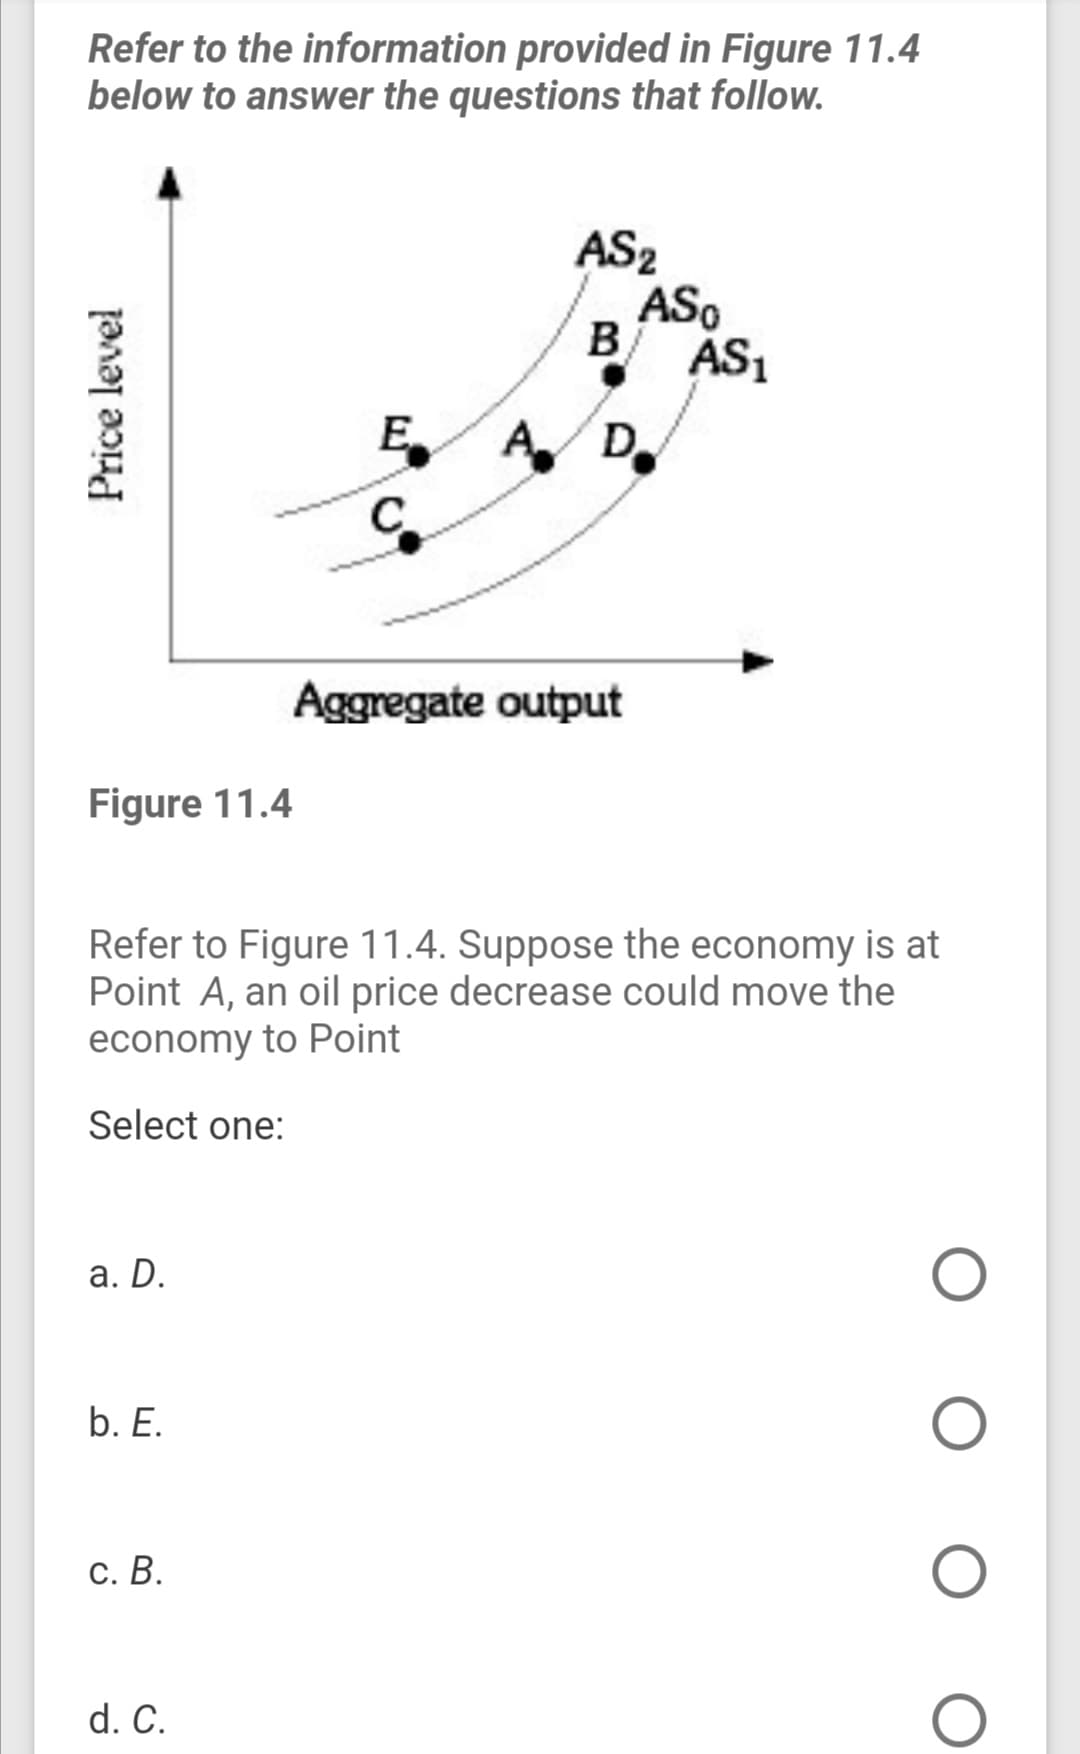 Refer to the information provided in Figure 11.4
below to answer the questions that follow.
AS2
ASo
B
ÁS,
E A
D.
Aggregate output
Figure 11.4
Refer to Figure 11.4. Suppose the economy is at
Point A, an oil price decrease could move the
economy to Point
Select one:
а. D.
b. E.
С. В.
d. C.
Price level
